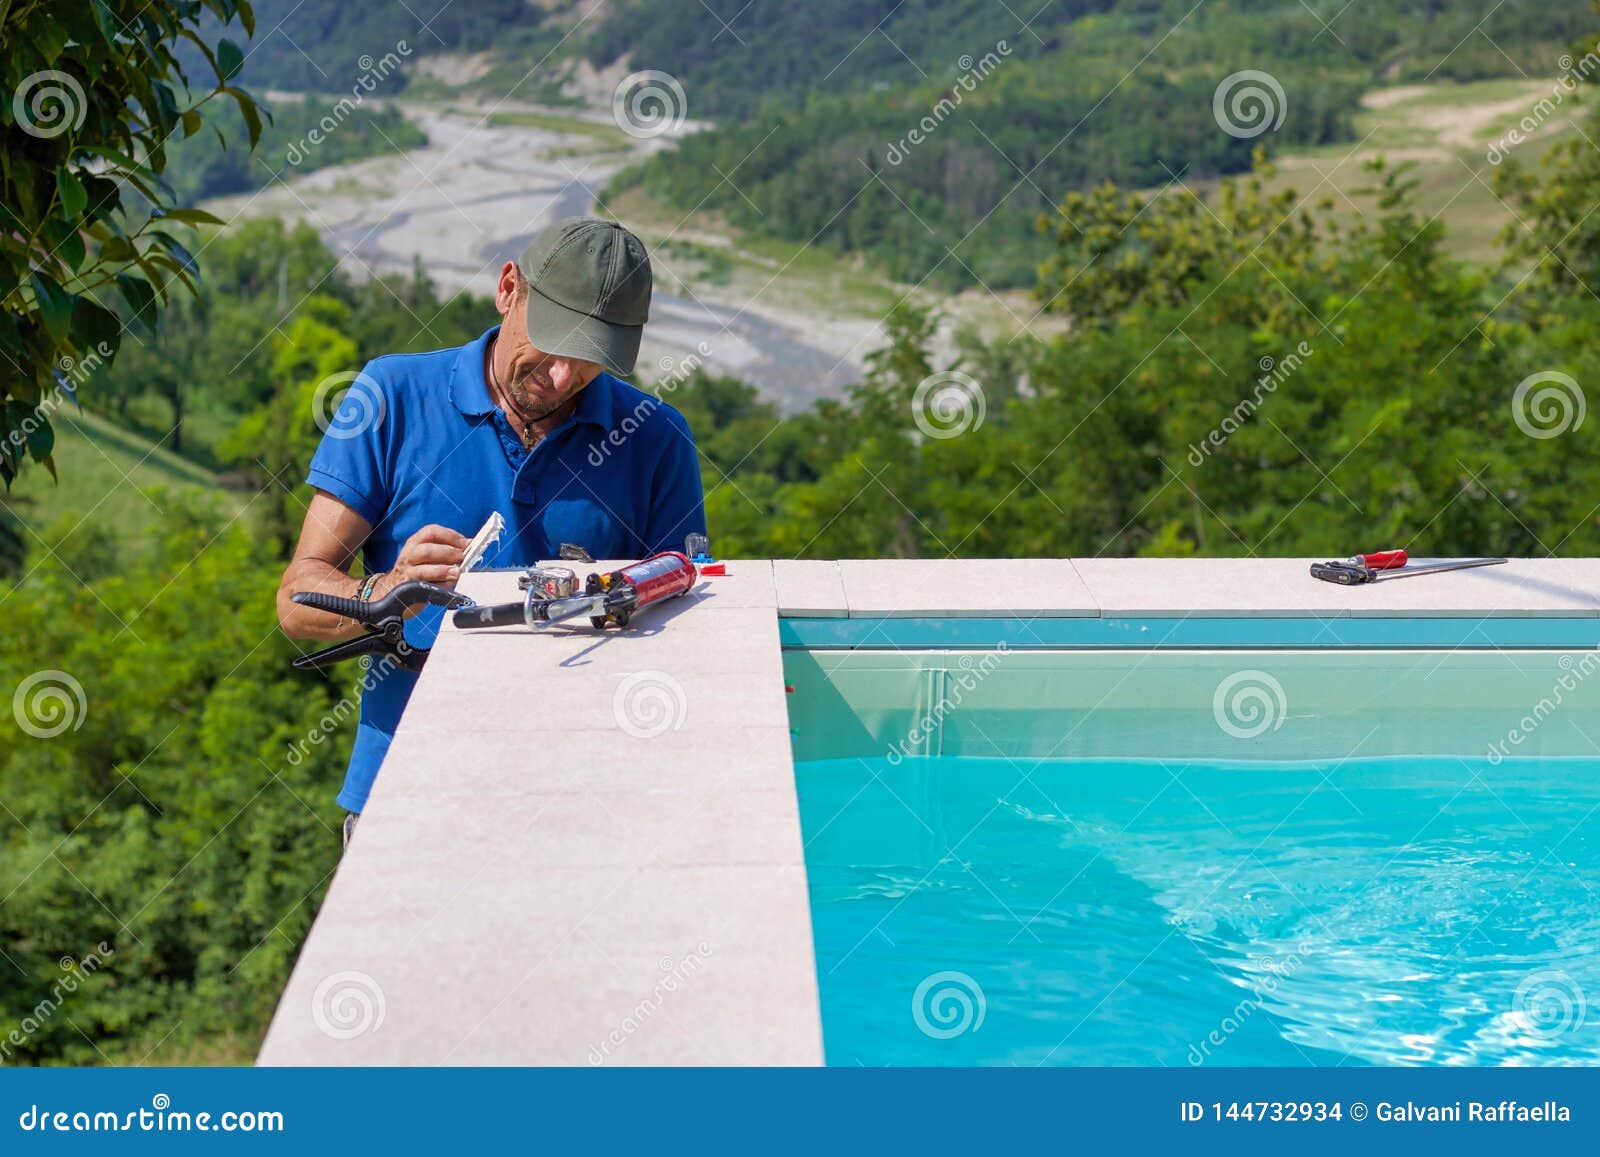 Tiler Working In A Garden Building The Edge Of A Pool Stock Photo